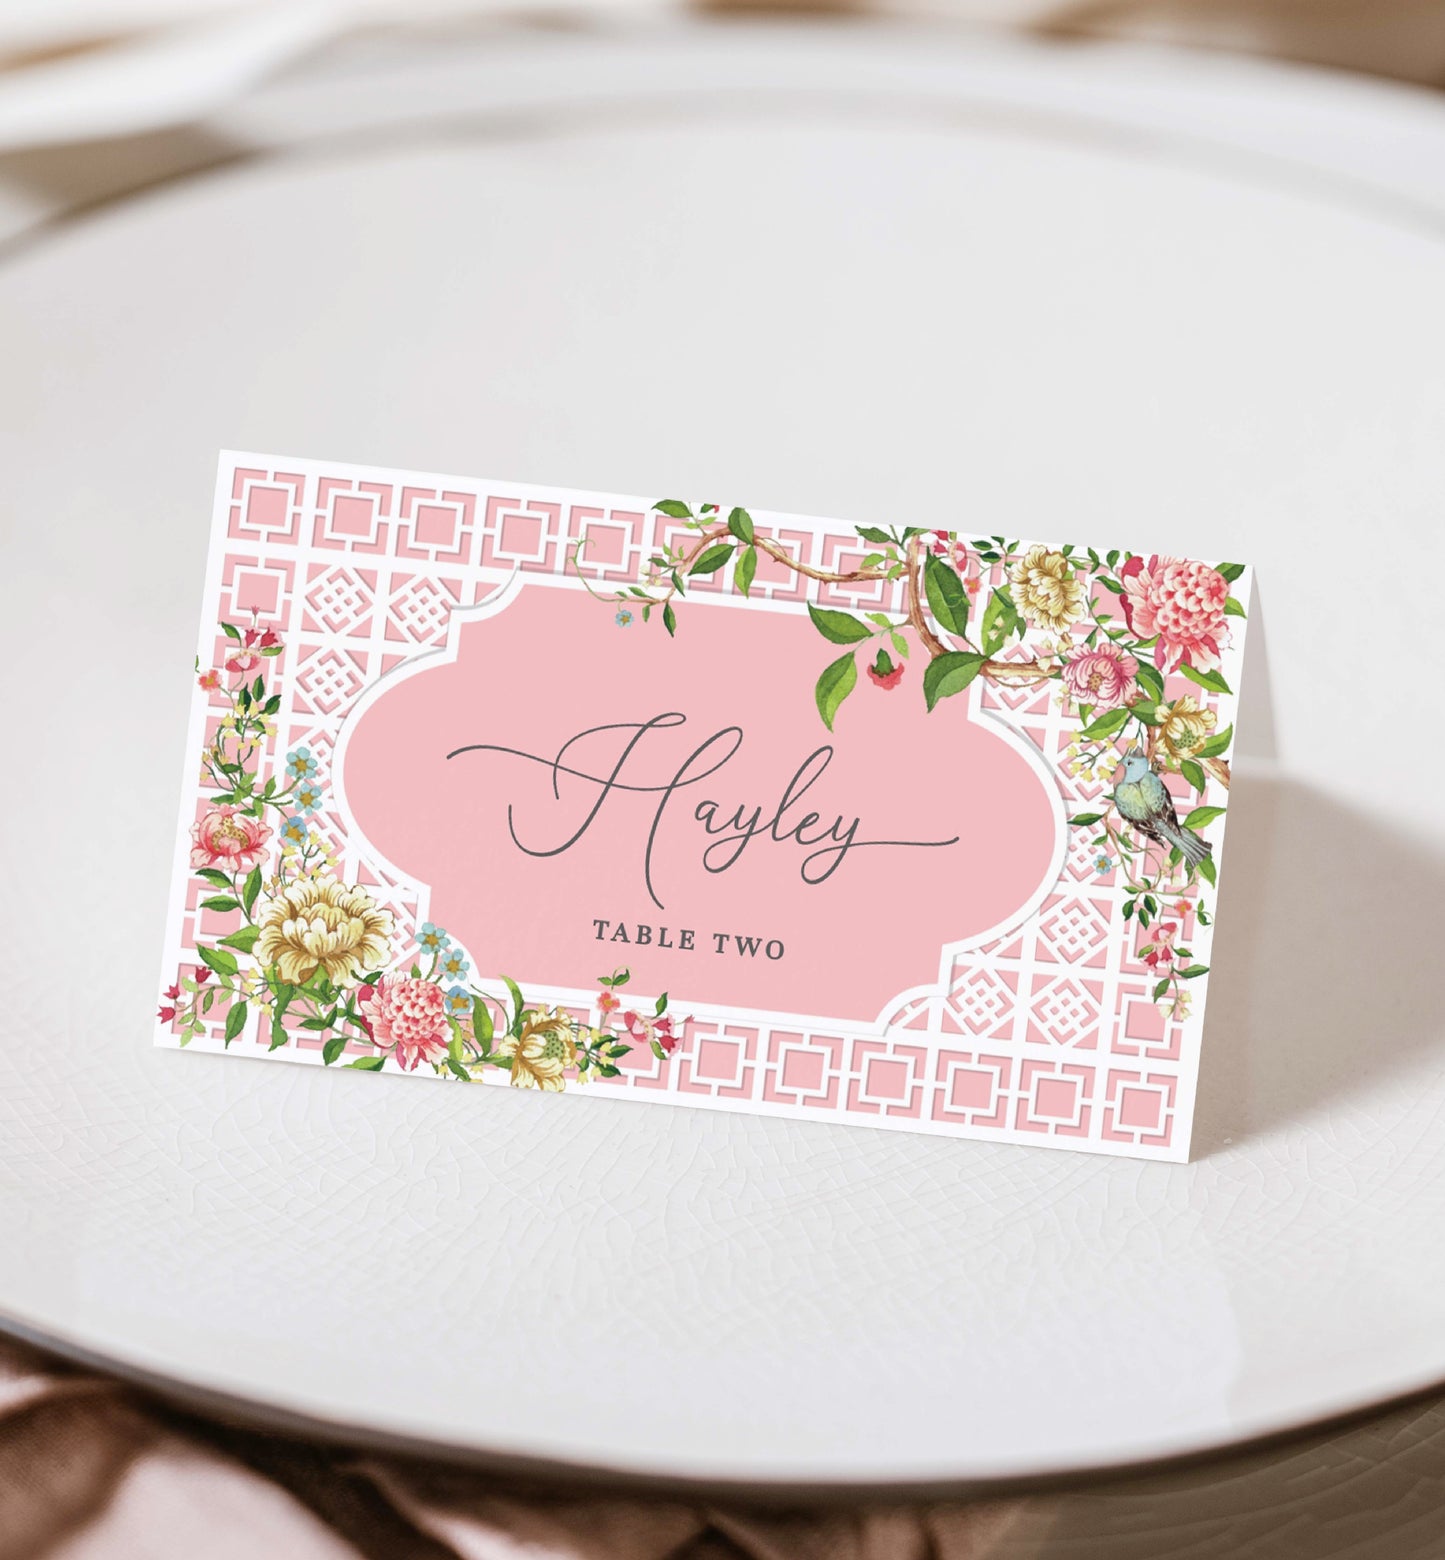 Marie Antoinette Theme Party Printable Place Card Template, Floral Chinoiserie Lattice, French Garden Theme, Bridal Shower Escort Cards Template, Spring Floral, Trianon